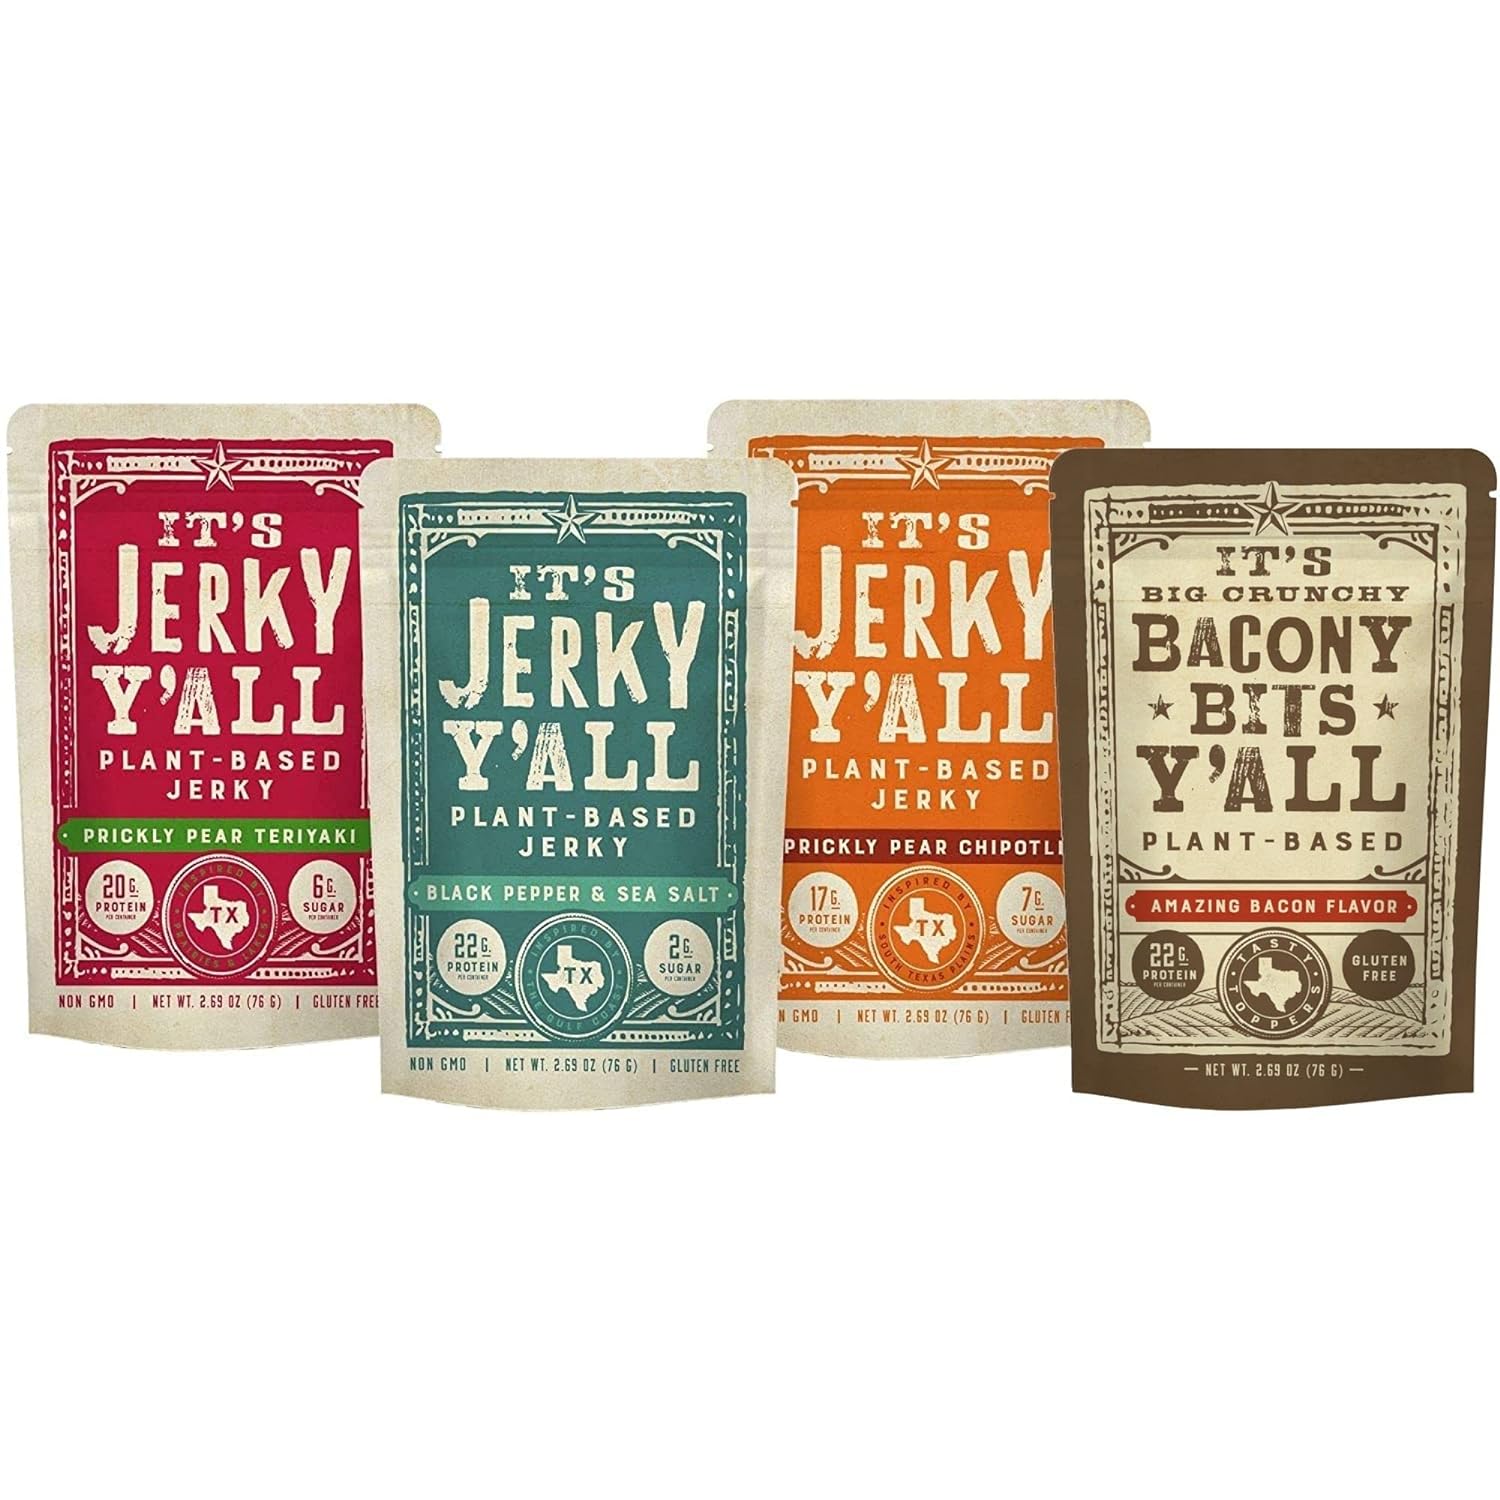 It's Jerky Y'all Plant Based Jerky and Bacon Bits Variety Pack | Beyond Tender Jerky and Crunchy Bacon Vegan Snacks | Non-GMO, Gluten Free, Vegetarian (4 Pack)